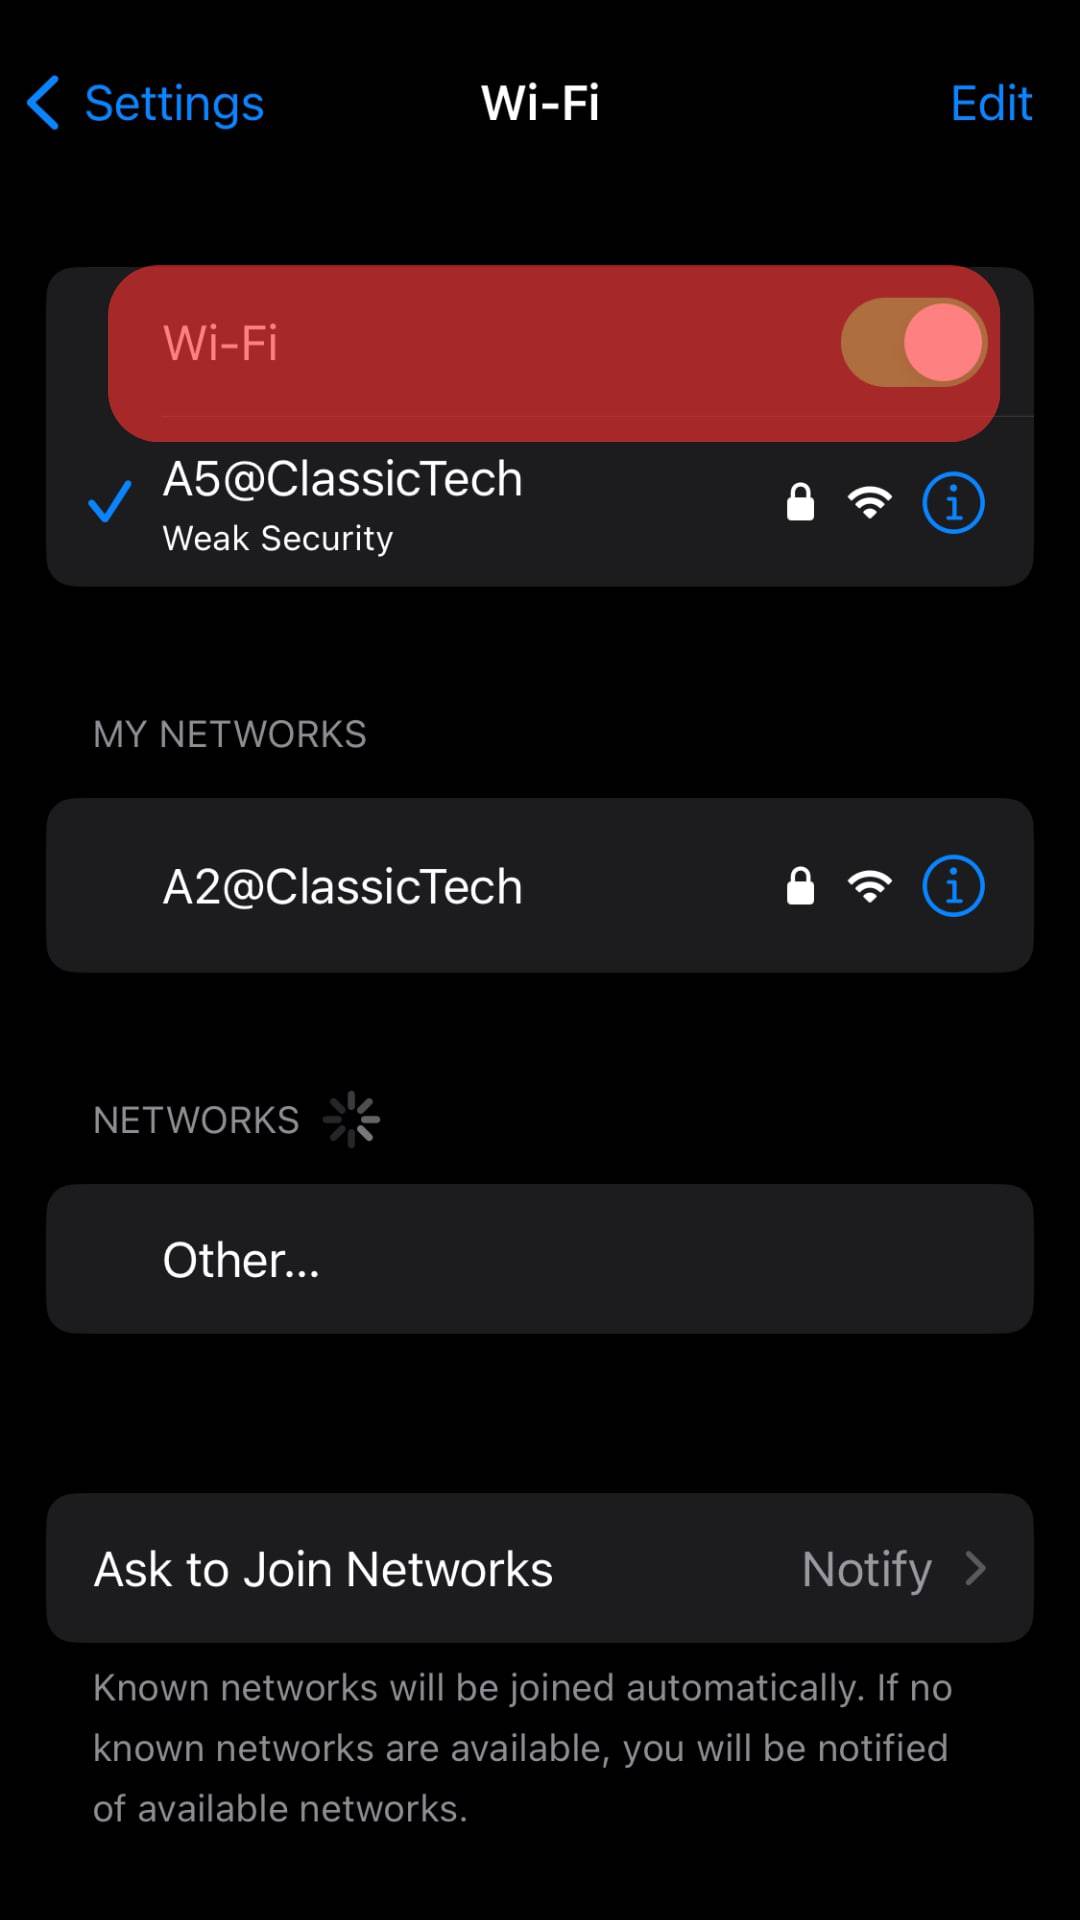 Toggle The Wifi Slider Off And Then On.&Nbsp;